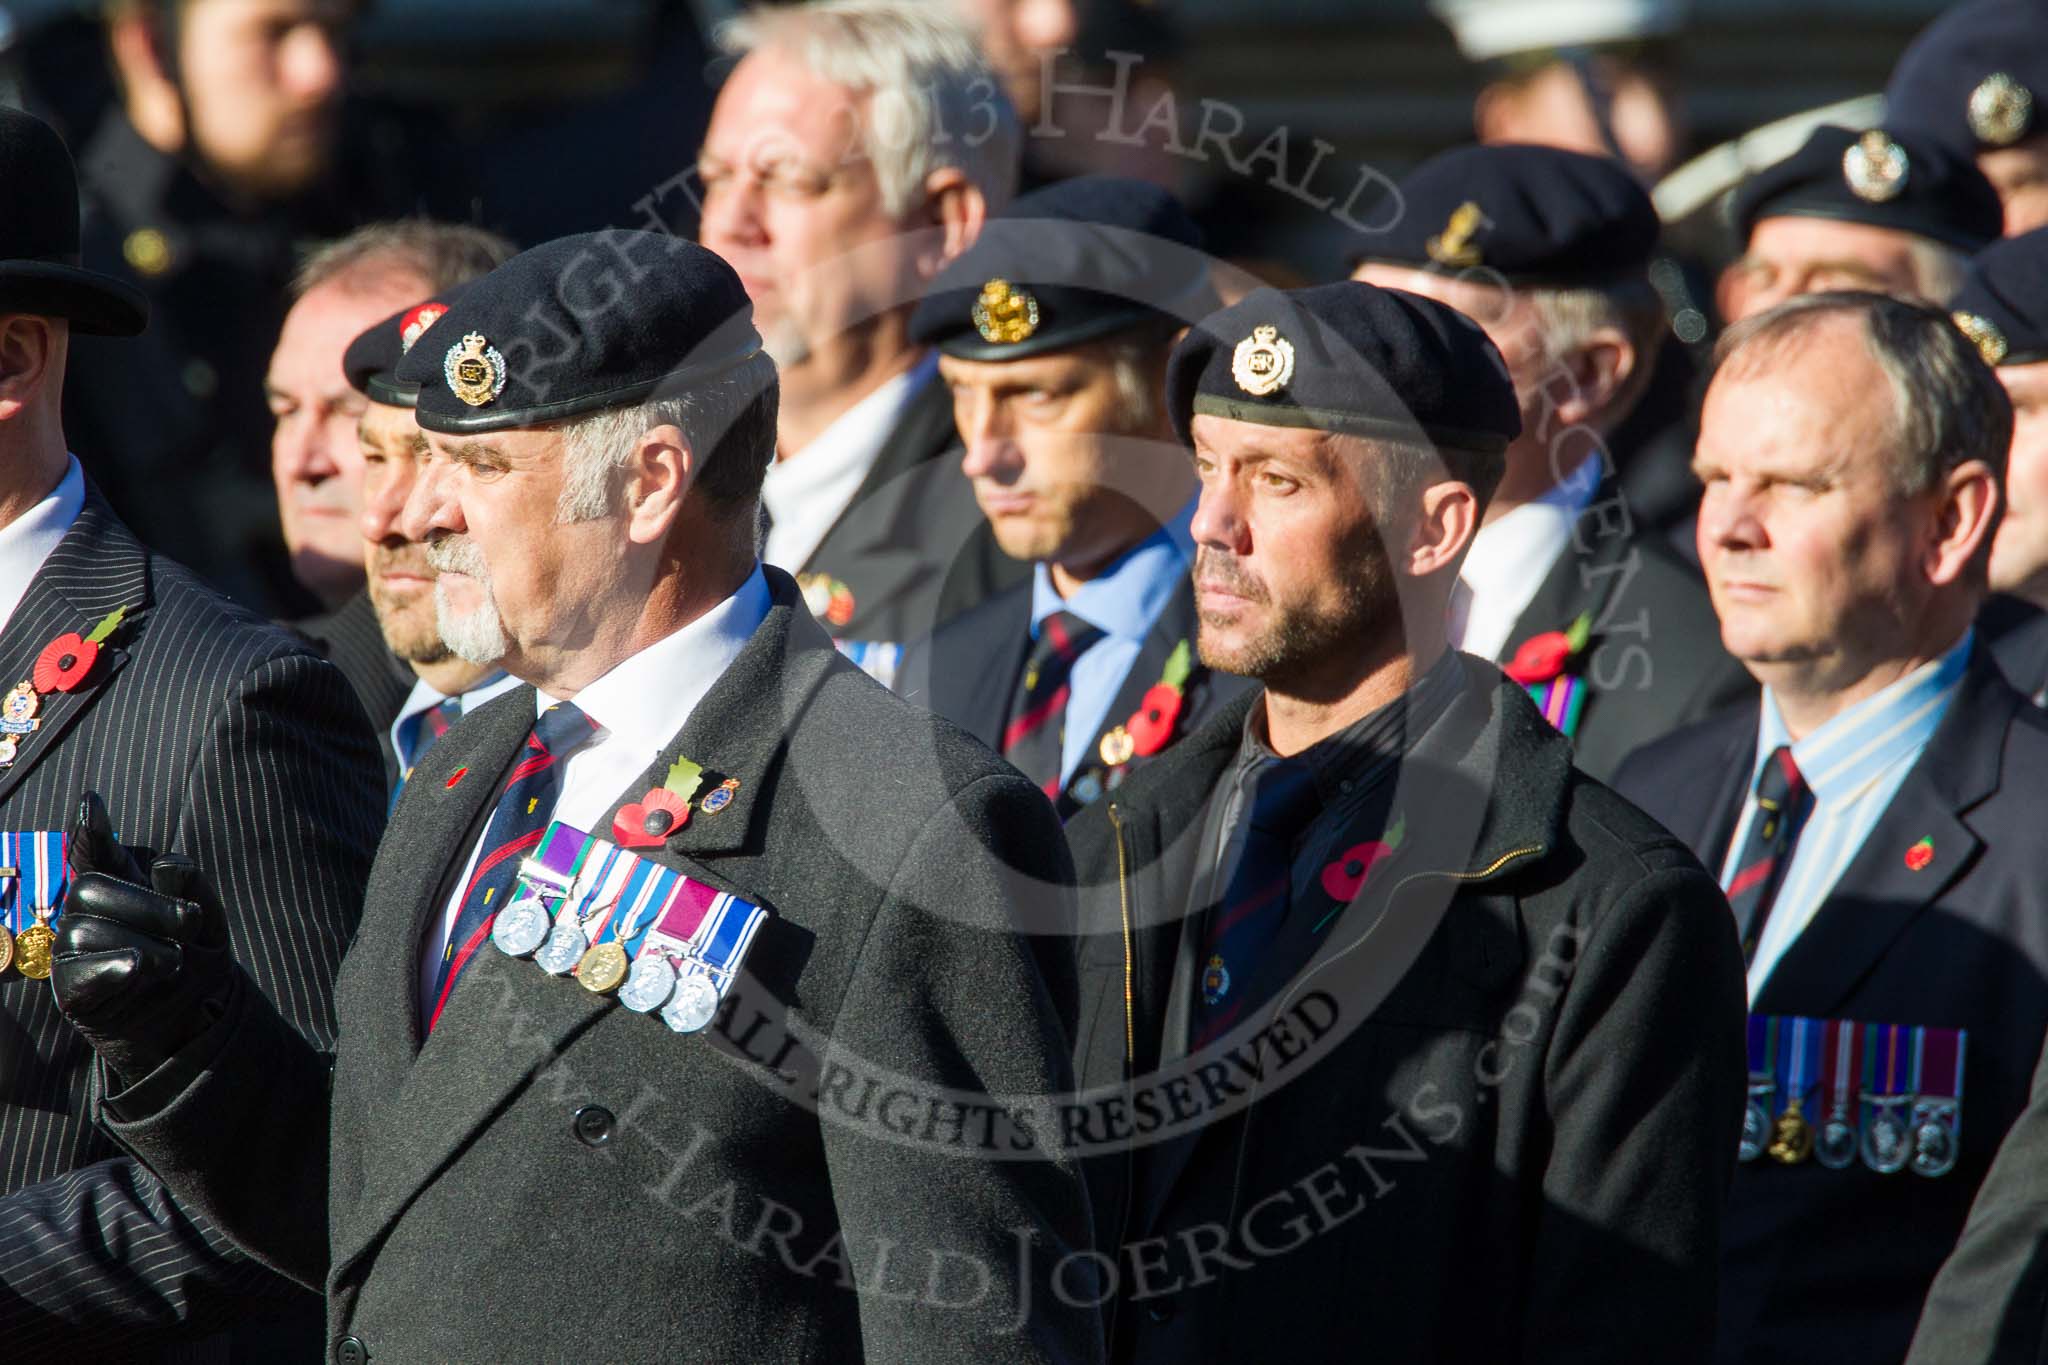 Remembrance Sunday at the Cenotaph in London 2014: Group B9 - Royal Engineers Bomb Disposal Association.
Press stand opposite the Foreign Office building, Whitehall, London SW1,
London,
Greater London,
United Kingdom,
on 09 November 2014 at 12:08, image #1580